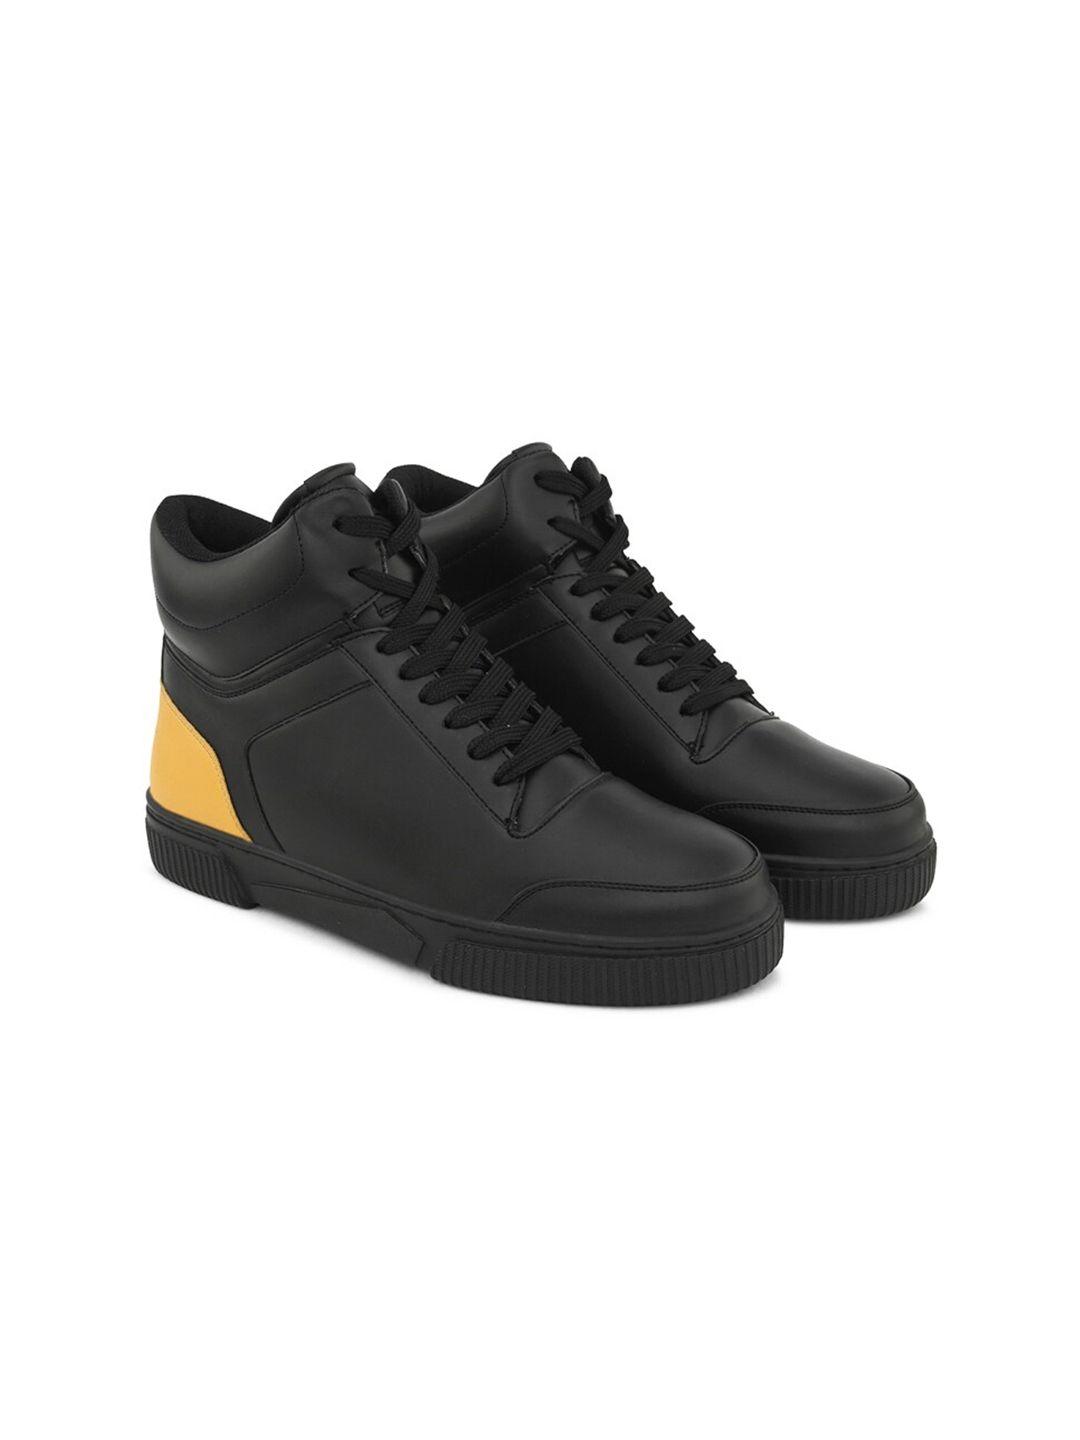 HRX by Hrithik Roshan Women Black & Yellow Mid Top Lightweight Comfort Insole Sneakers